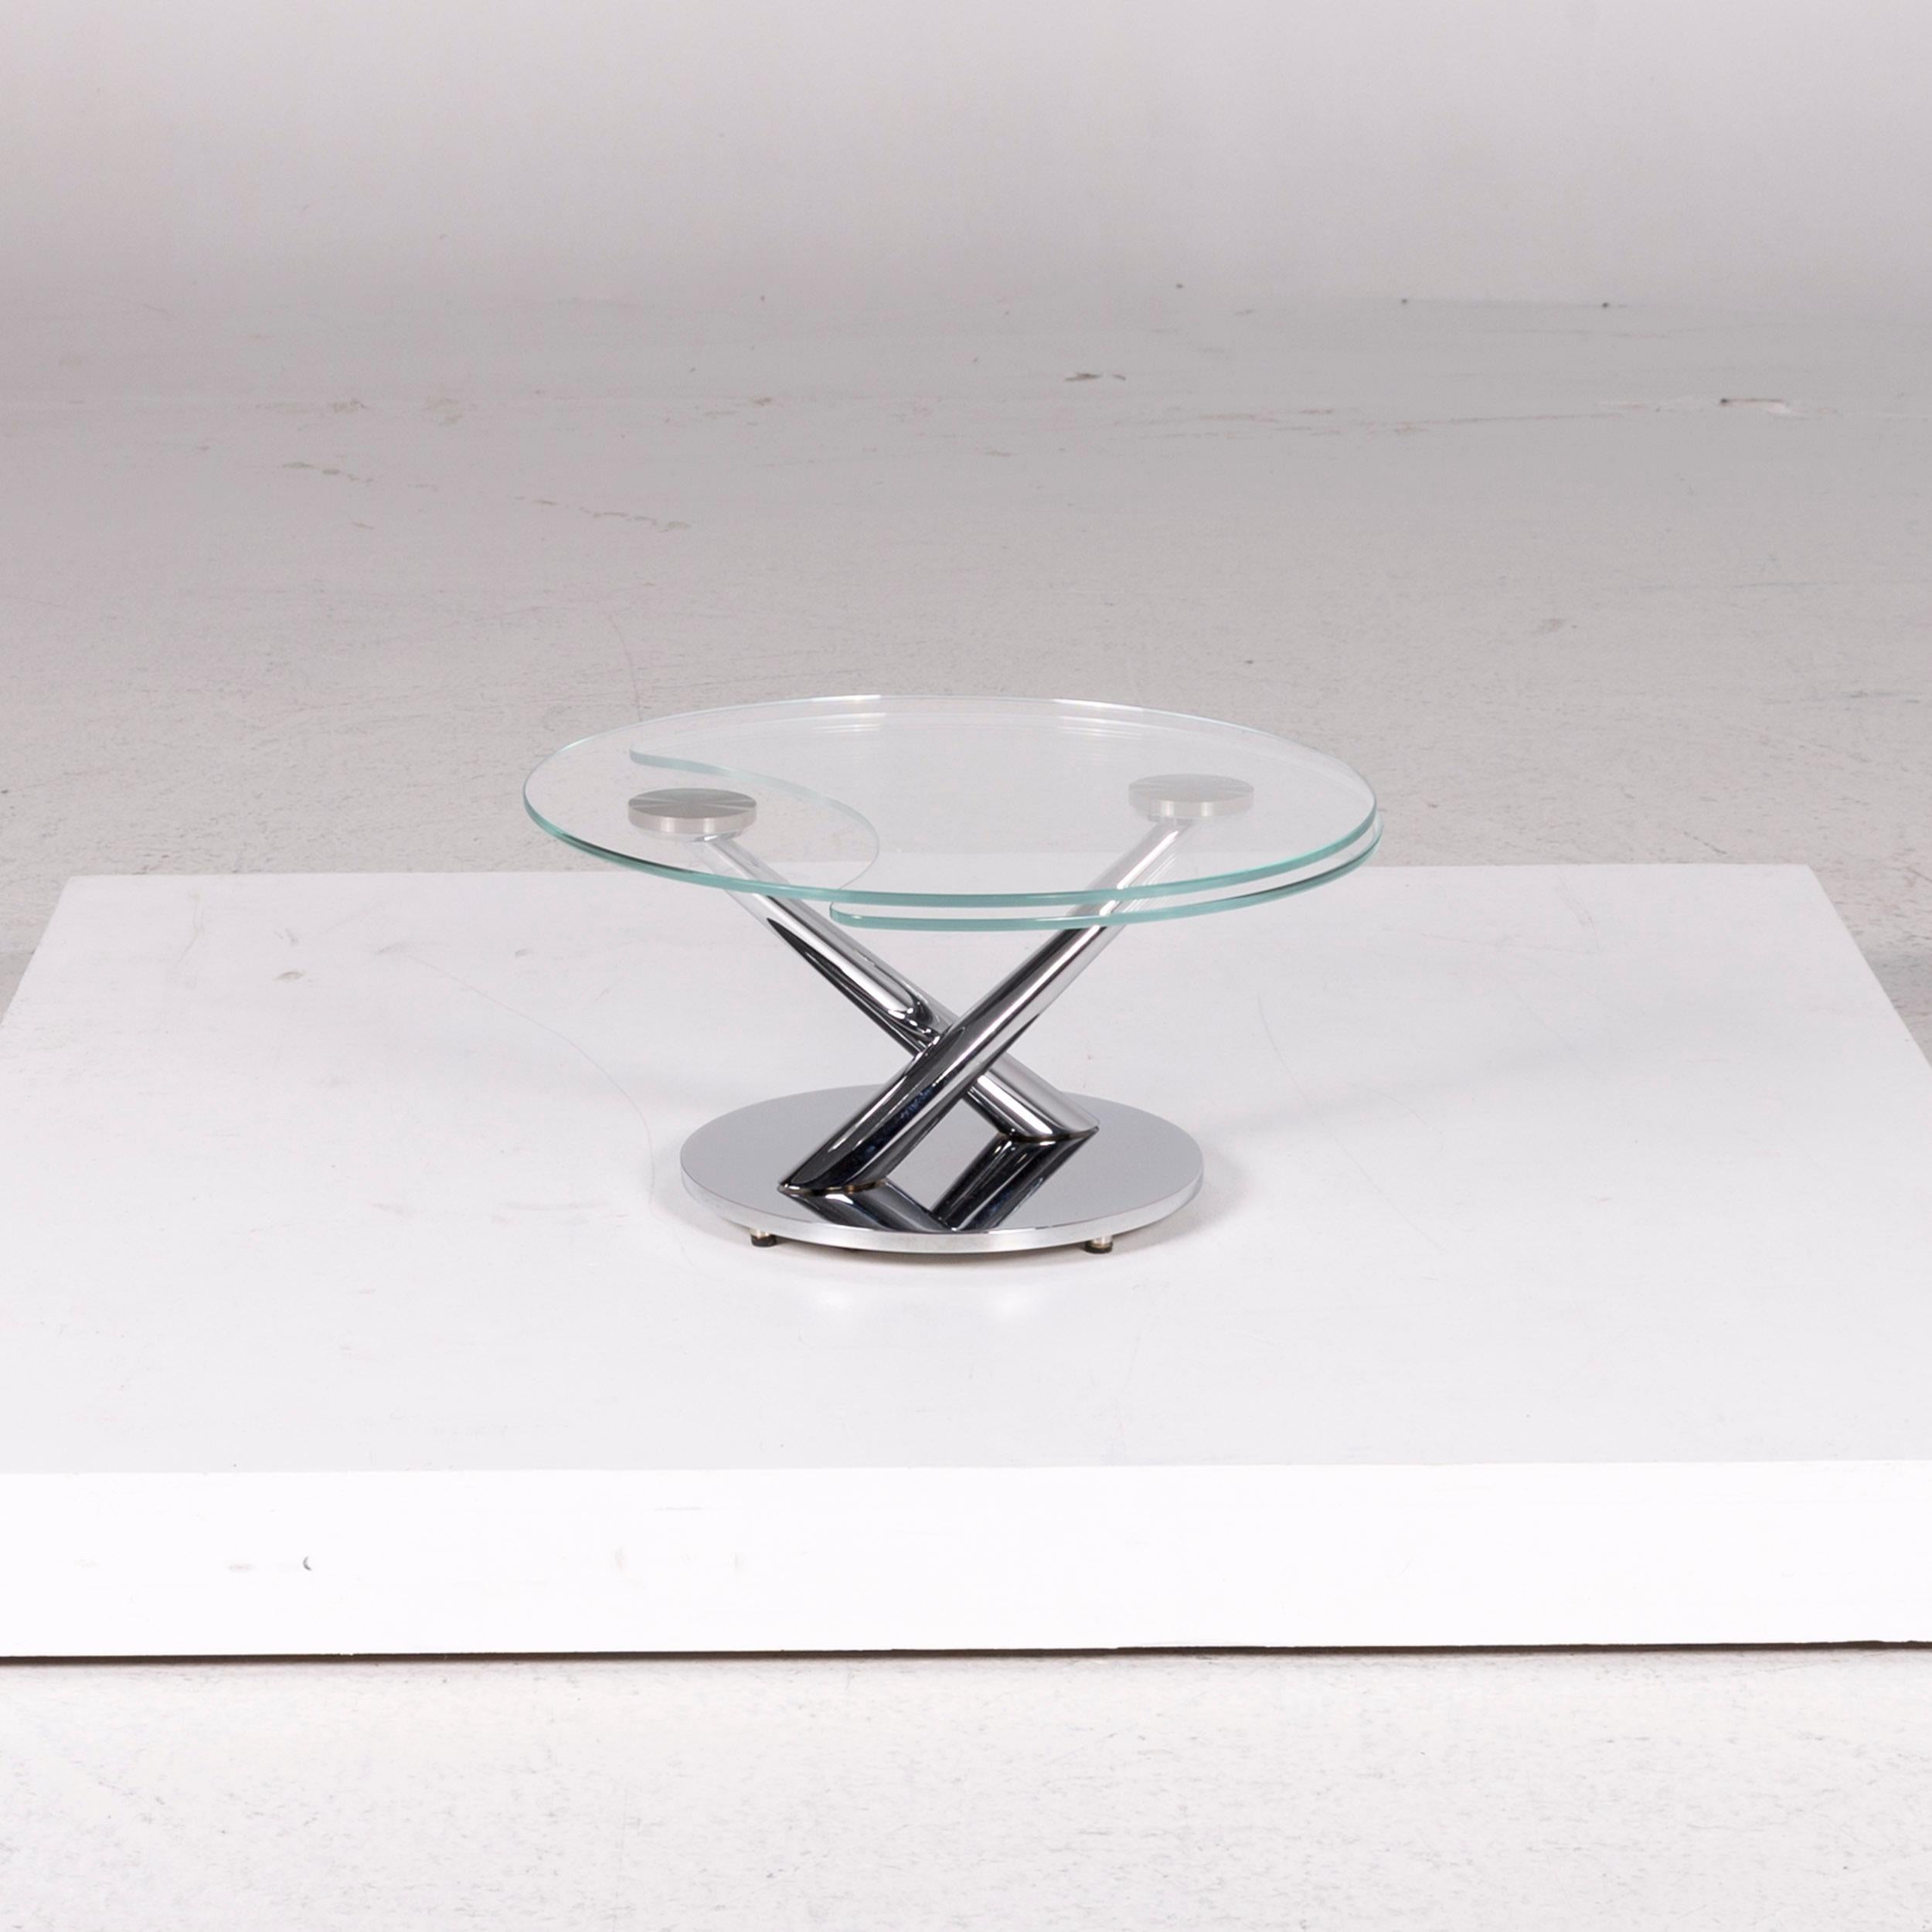 We bring to you a NAOS glass coffee table round movable function table.
 SKU: #12193
 

 Product Measurements in centimeters:
 

 depth: 41
 width: 46
 height: 20
 seat-height: 
 rest-height: 
 seat-depth: 
 seat-width: 
 back-height: